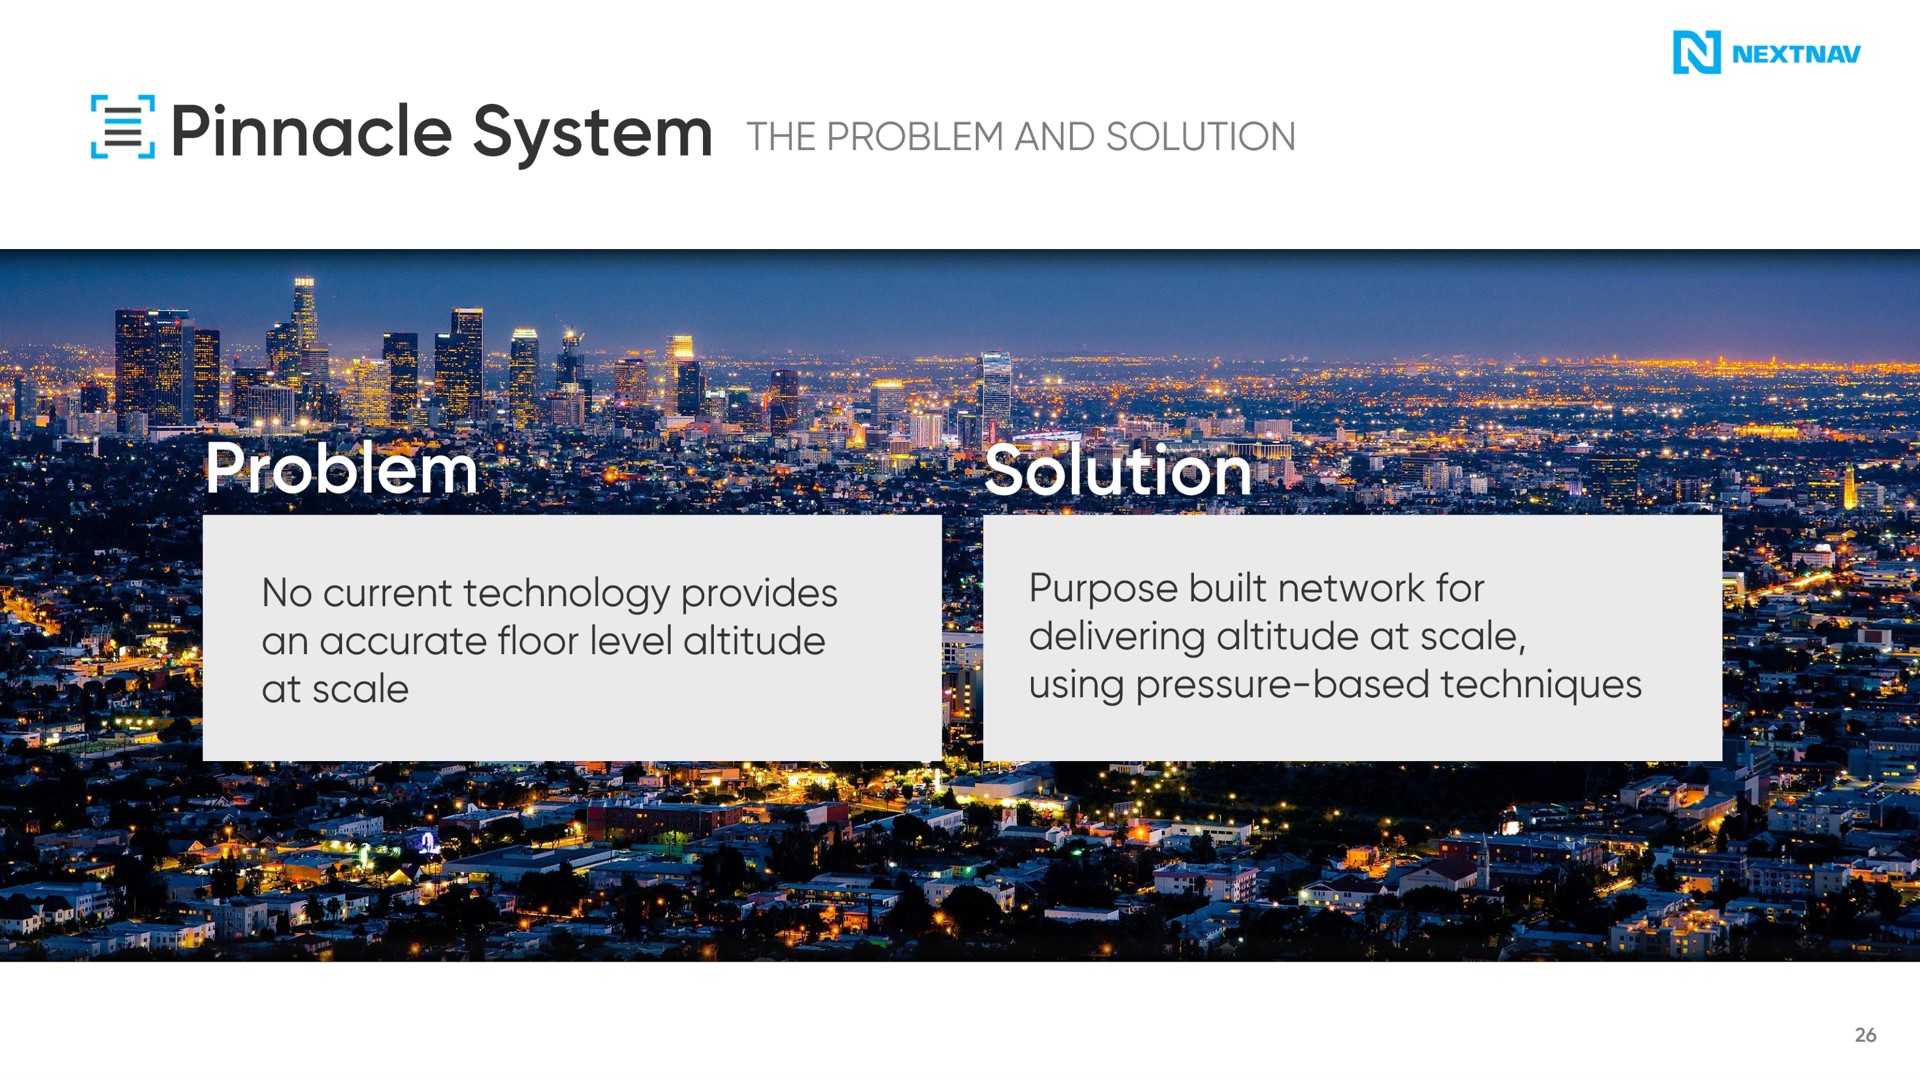 pinnacle system the problem and solution | NextNav